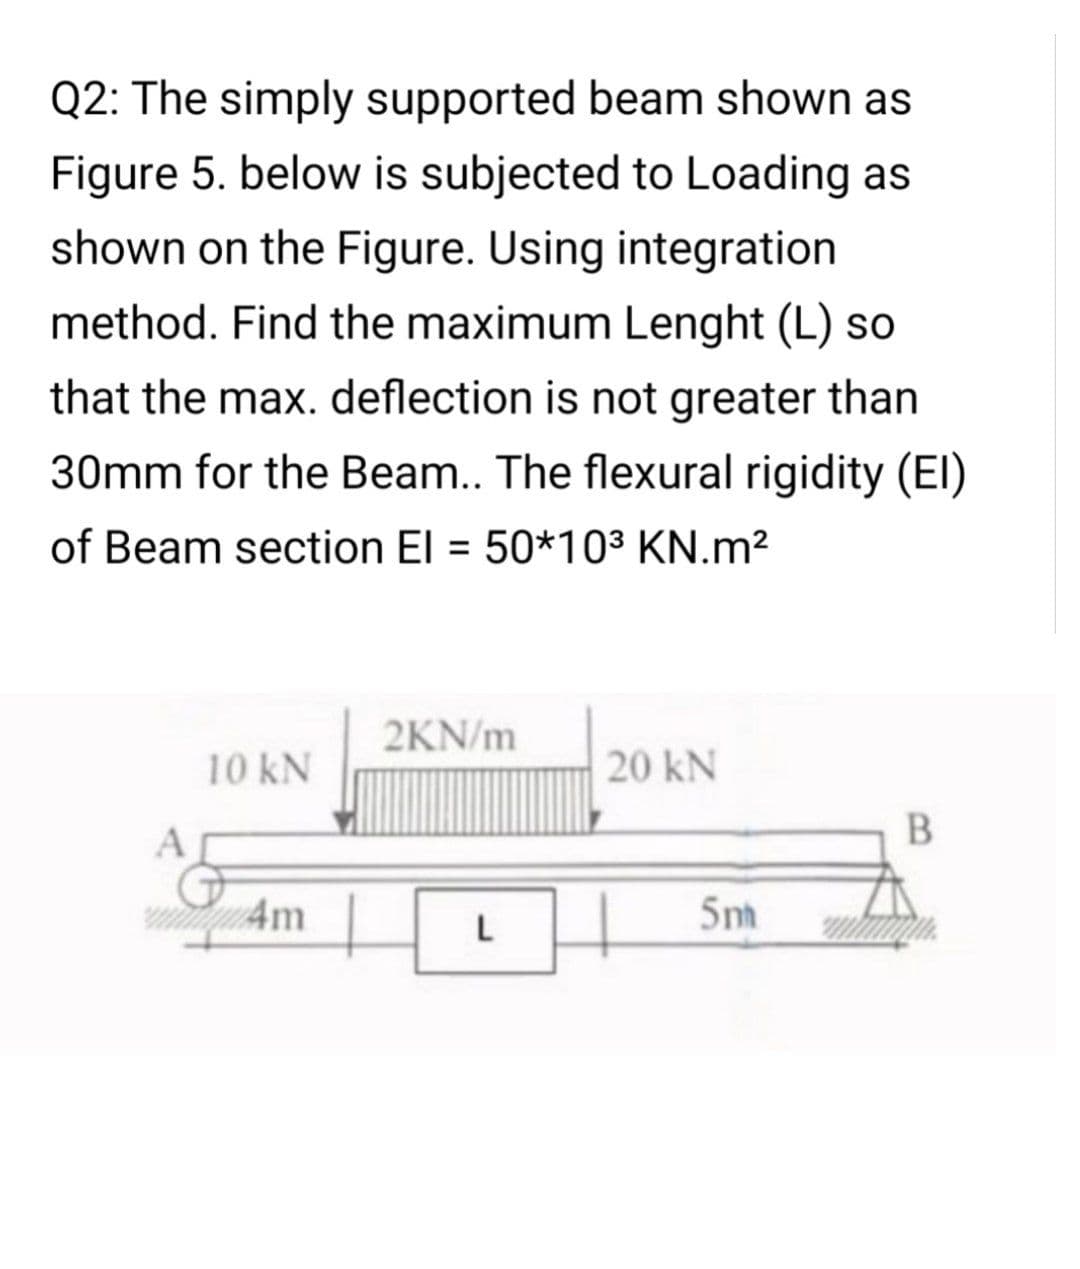 Q2: The simply supported beam shown as
Figure 5. below is subjected to Loading as
shown on the Figure. Using integration
method. Find the maximum Lenght (L) so
that the max. deflection is not greater than
30mm for the Beam.. The flexural rigidity (EI)
of Beam section El = 50*10³ KN.m²
2KN/m
10 kN
20 kN
5m
L
